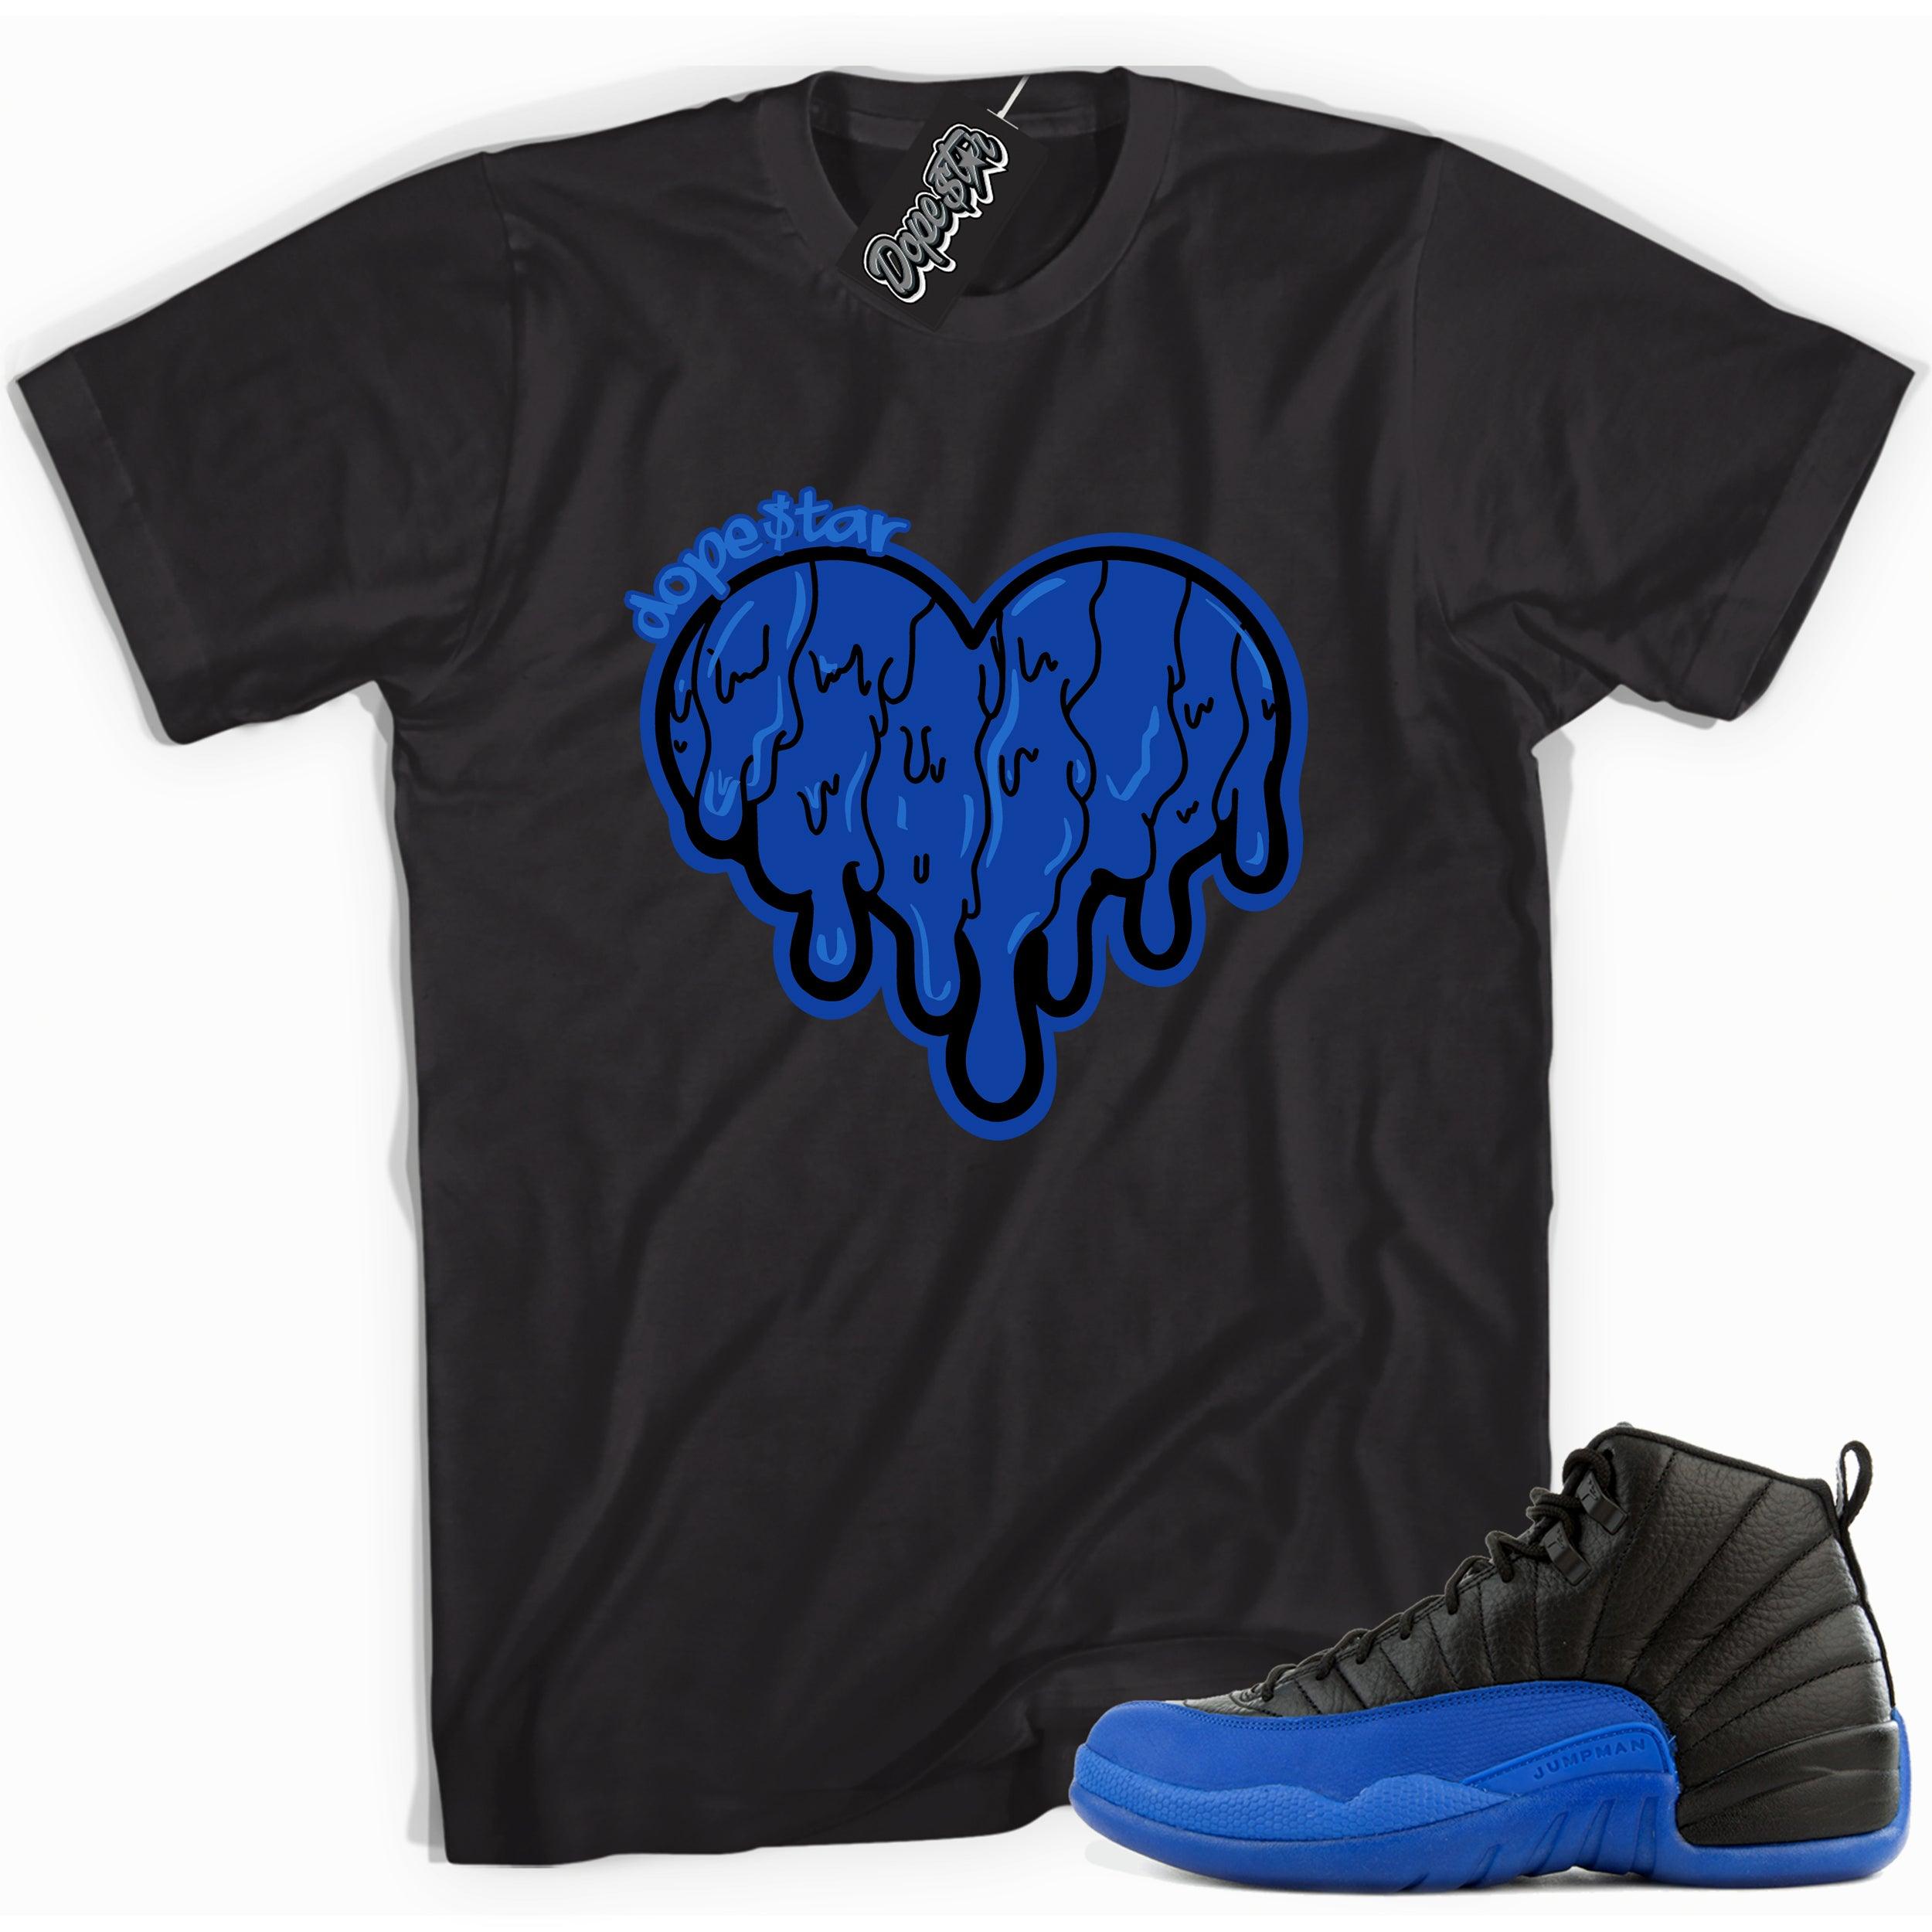 Cool black graphic tee with 'melting heart dopestar' print, that perfectly matches  Air Jordan 12 Retro Black Game Royal sneakers.